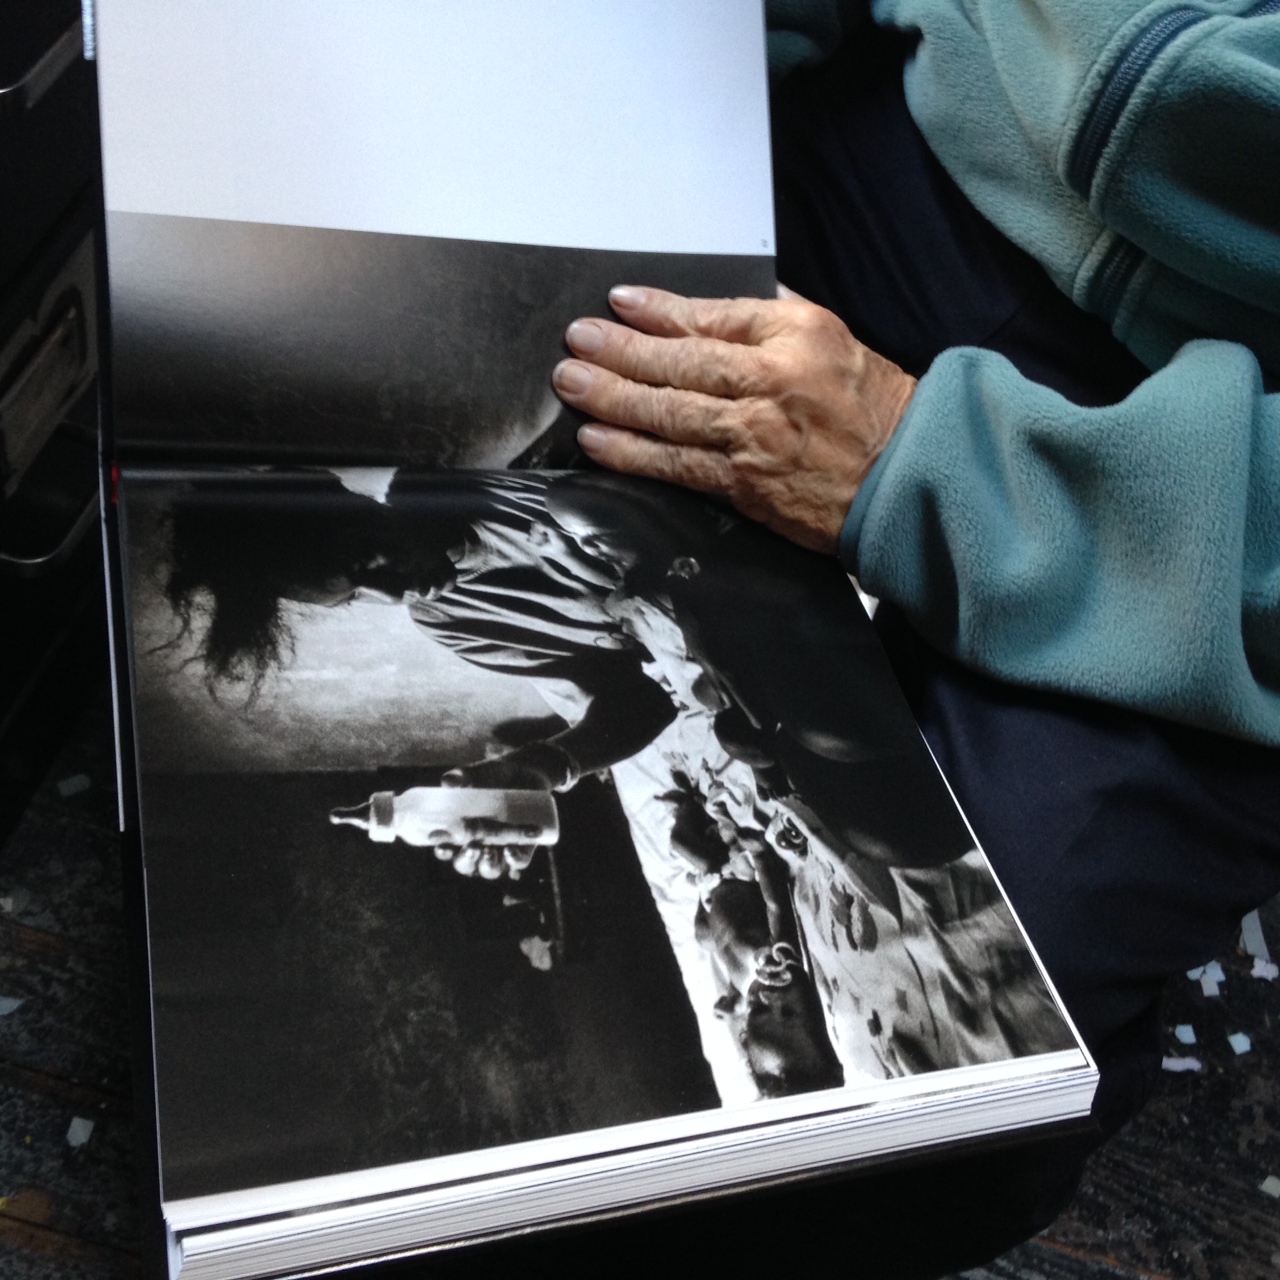 My time with Robert Frank